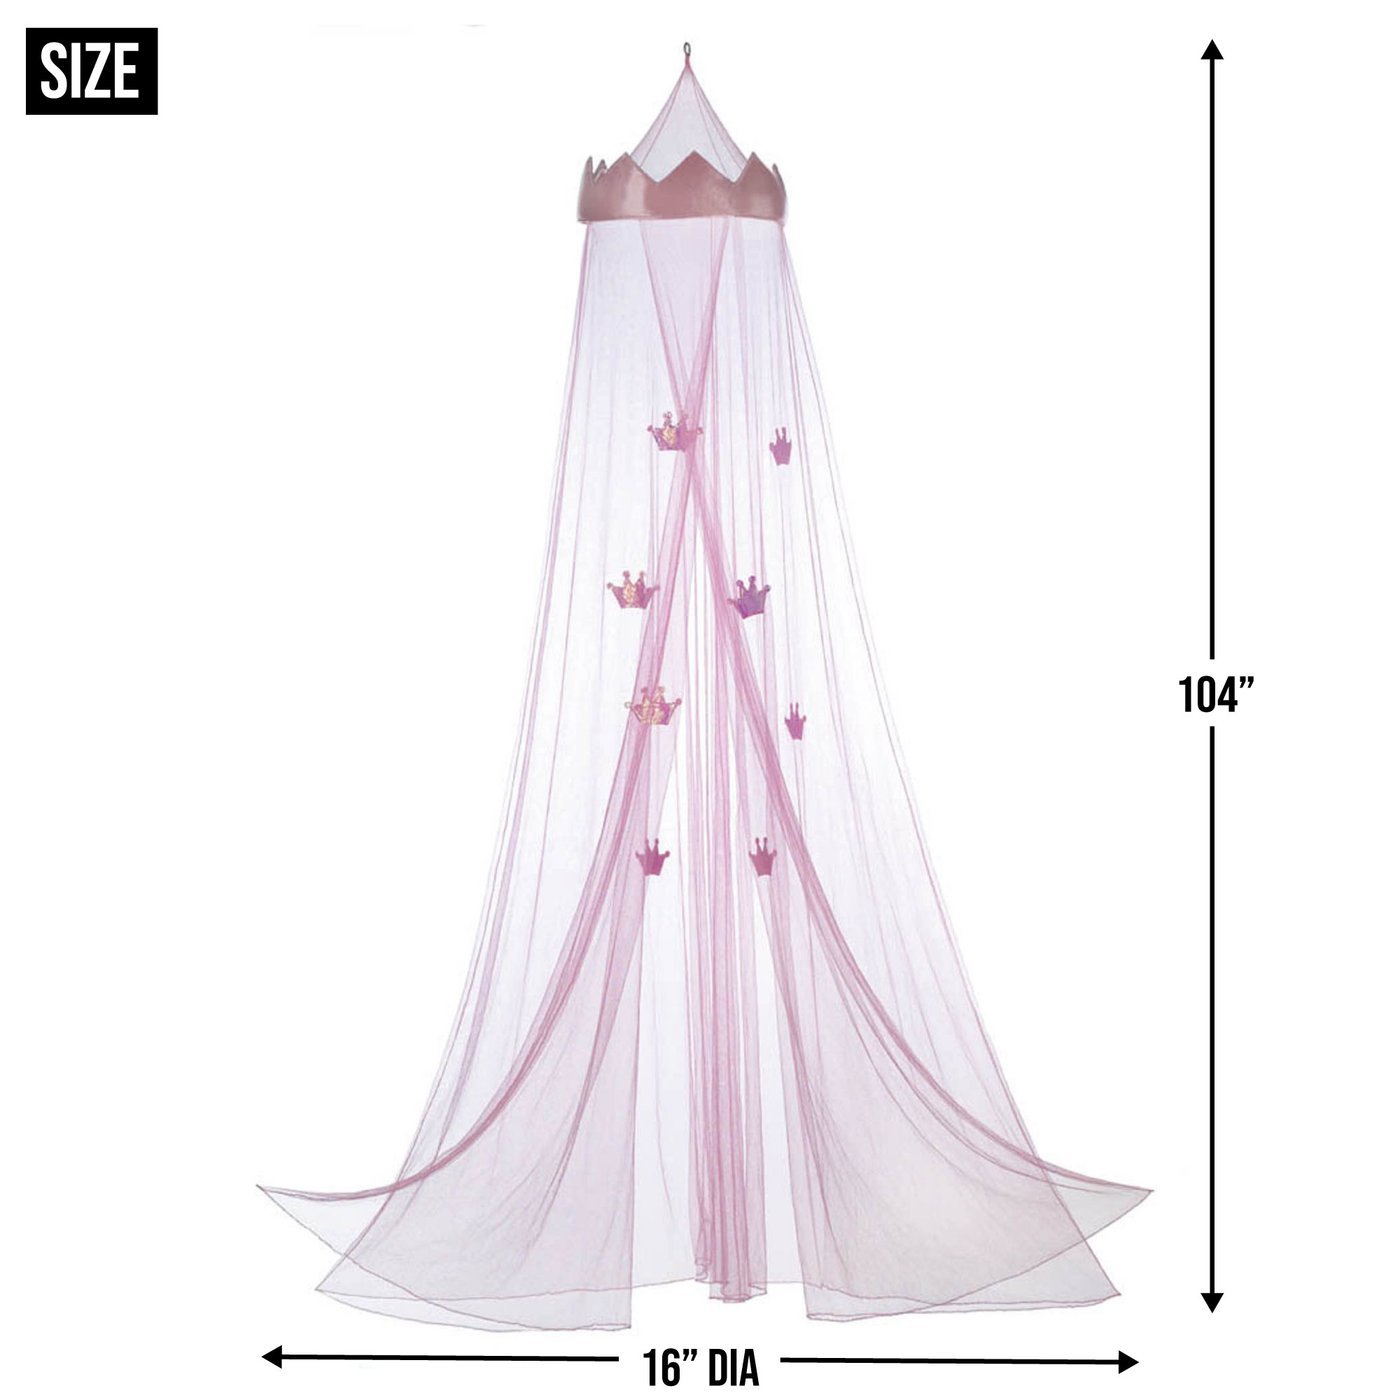 Accent Plus Pink Princess Crown Bed Canopy - Fancy Nursery